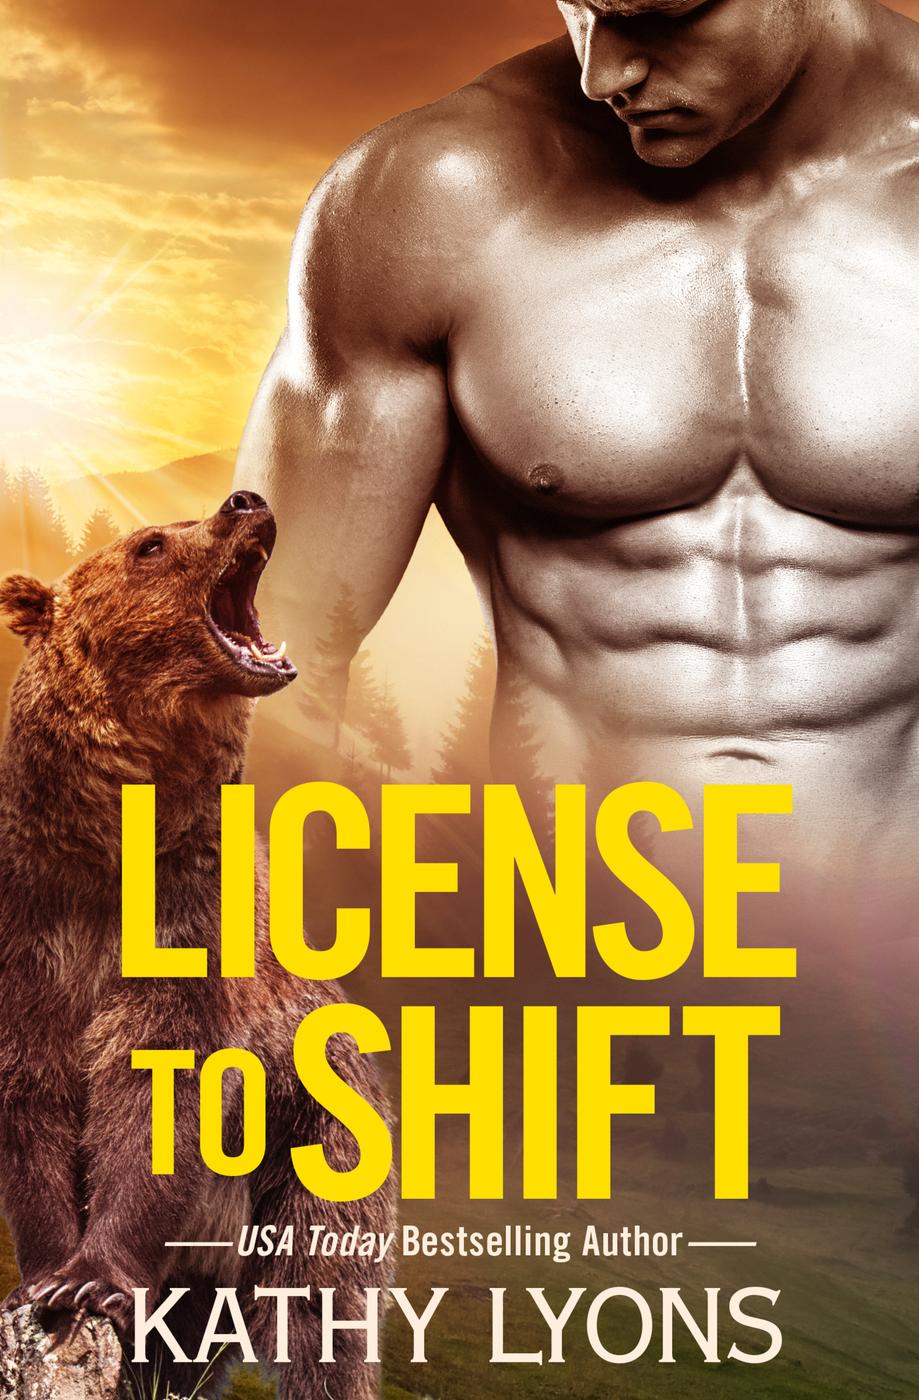 License to Shift (2016)